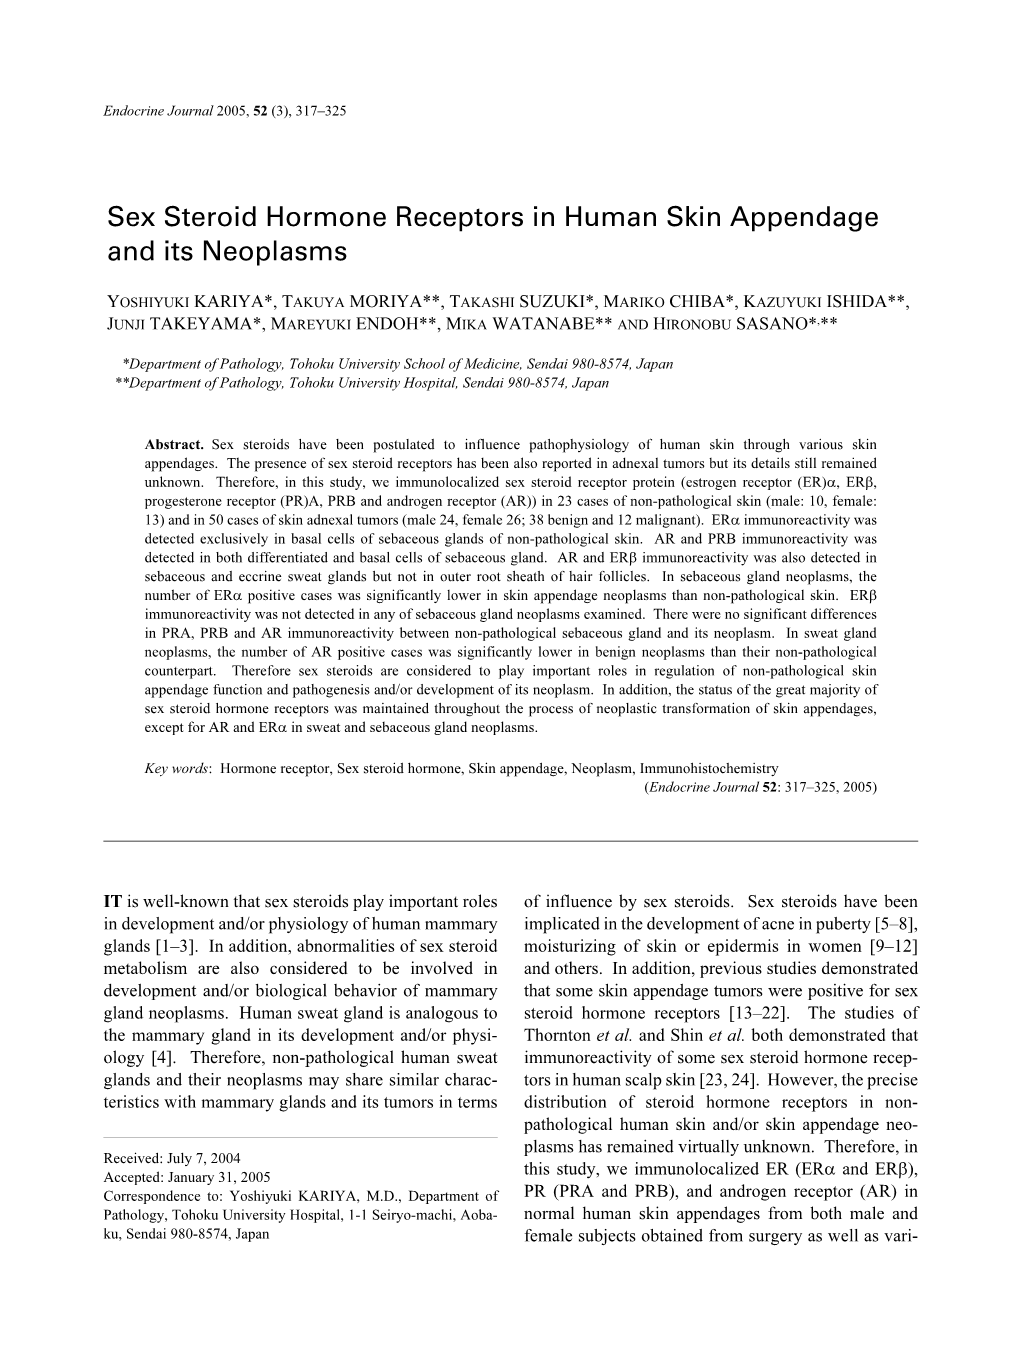 Sex Steroid Hormone Receptors in Human Skin Appendage and Its Neoplasms